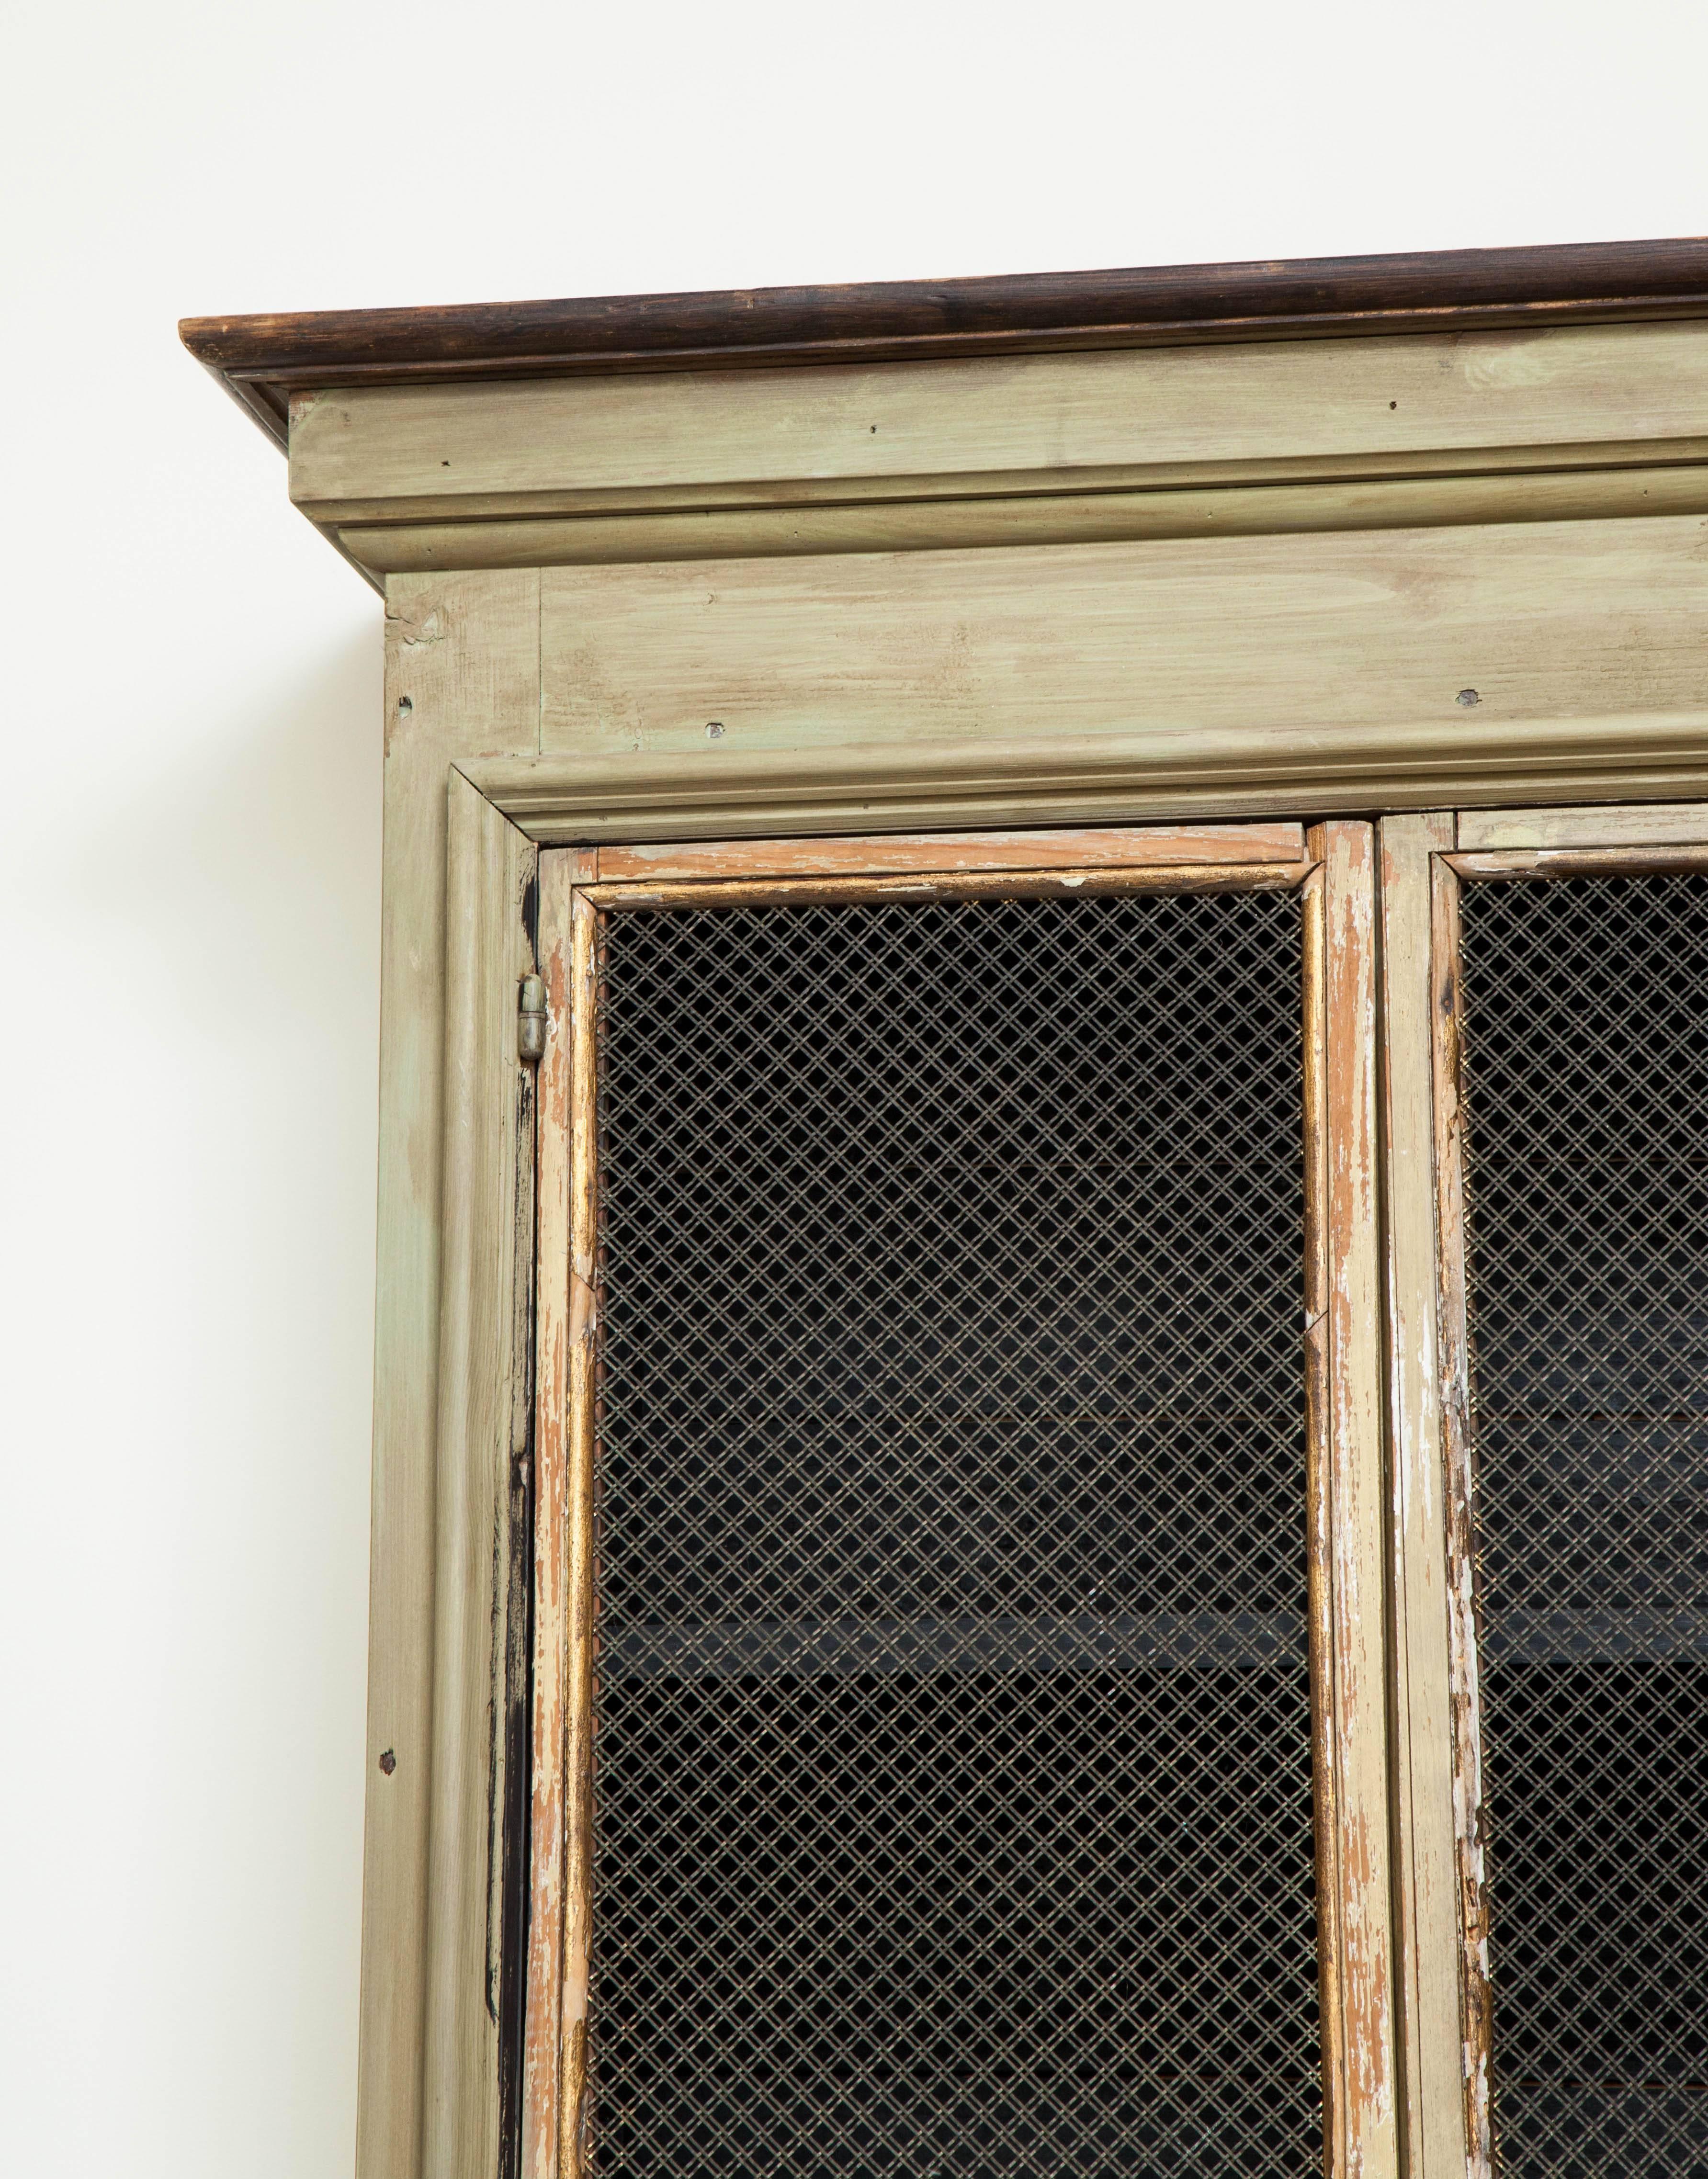 19th century French painted wood bookcases with gilt accents and inset metal grilles. Adjustable shelves six.